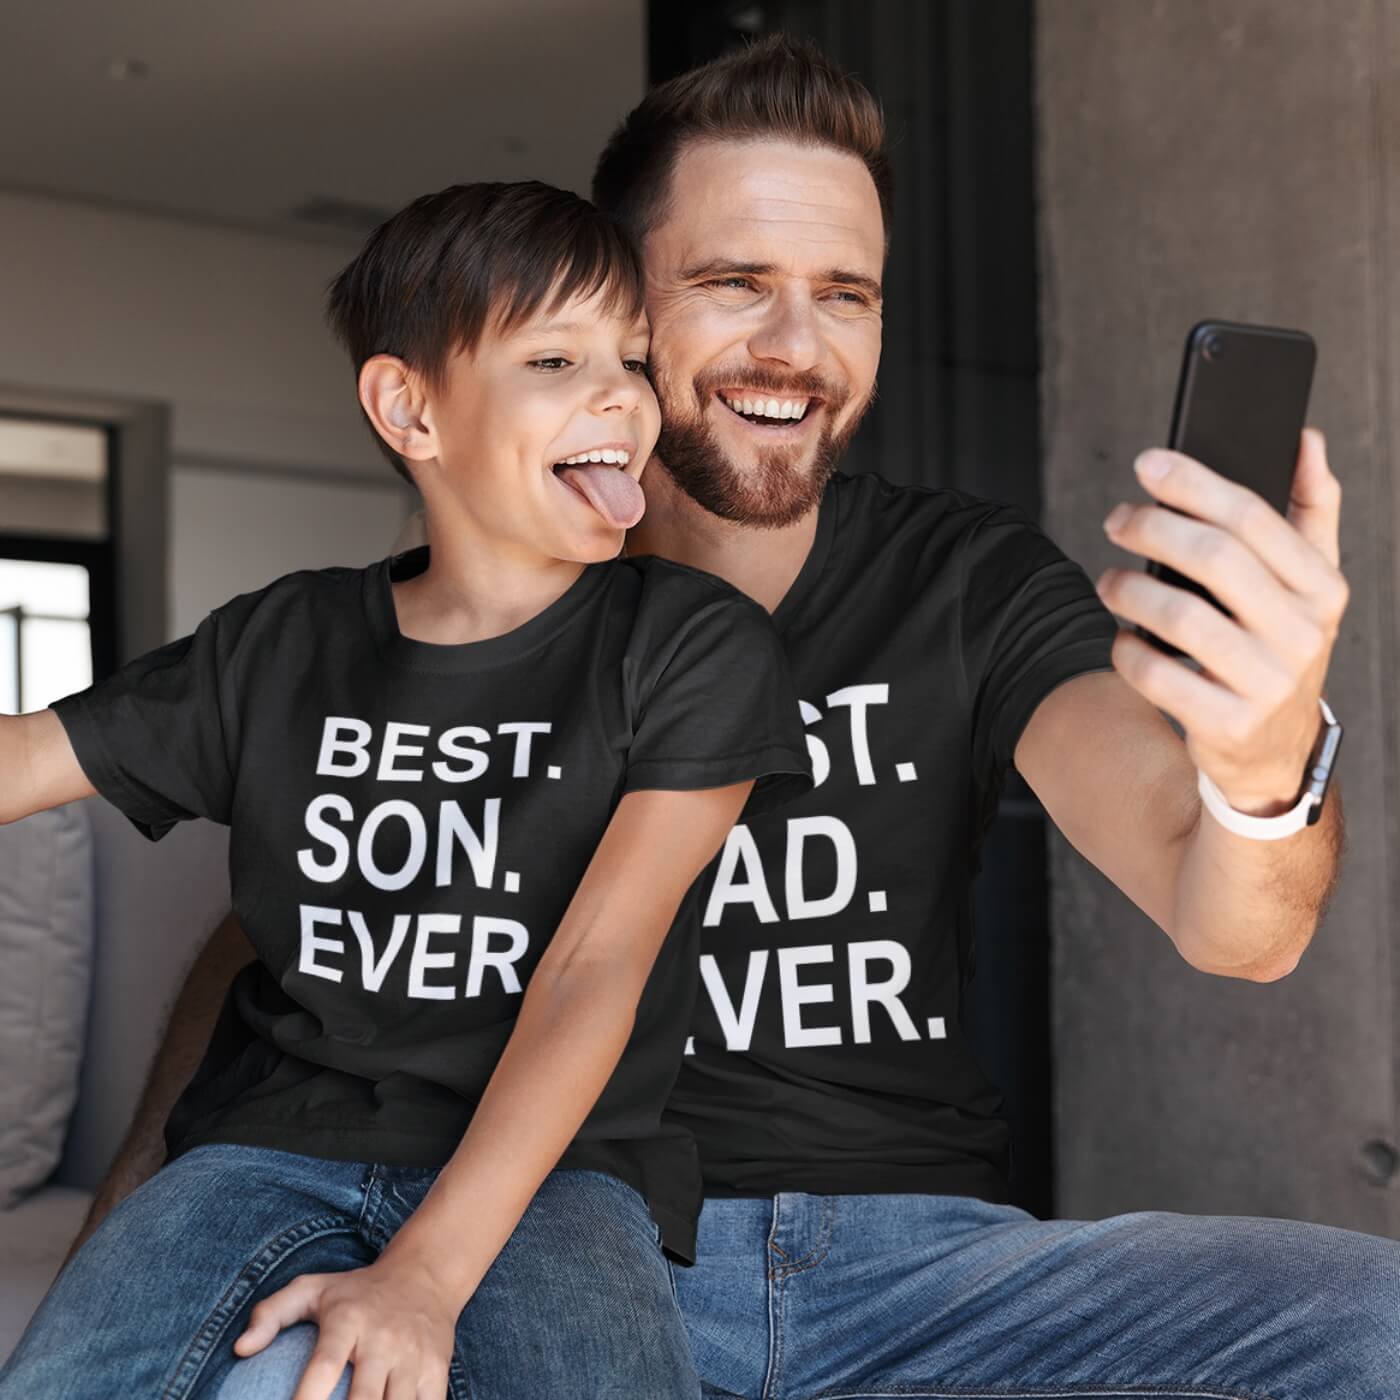 https://vivamake.com/wp-content/uploads/2020/08/family-tshirt-with-print-best-son-and-dad-ever.jpg